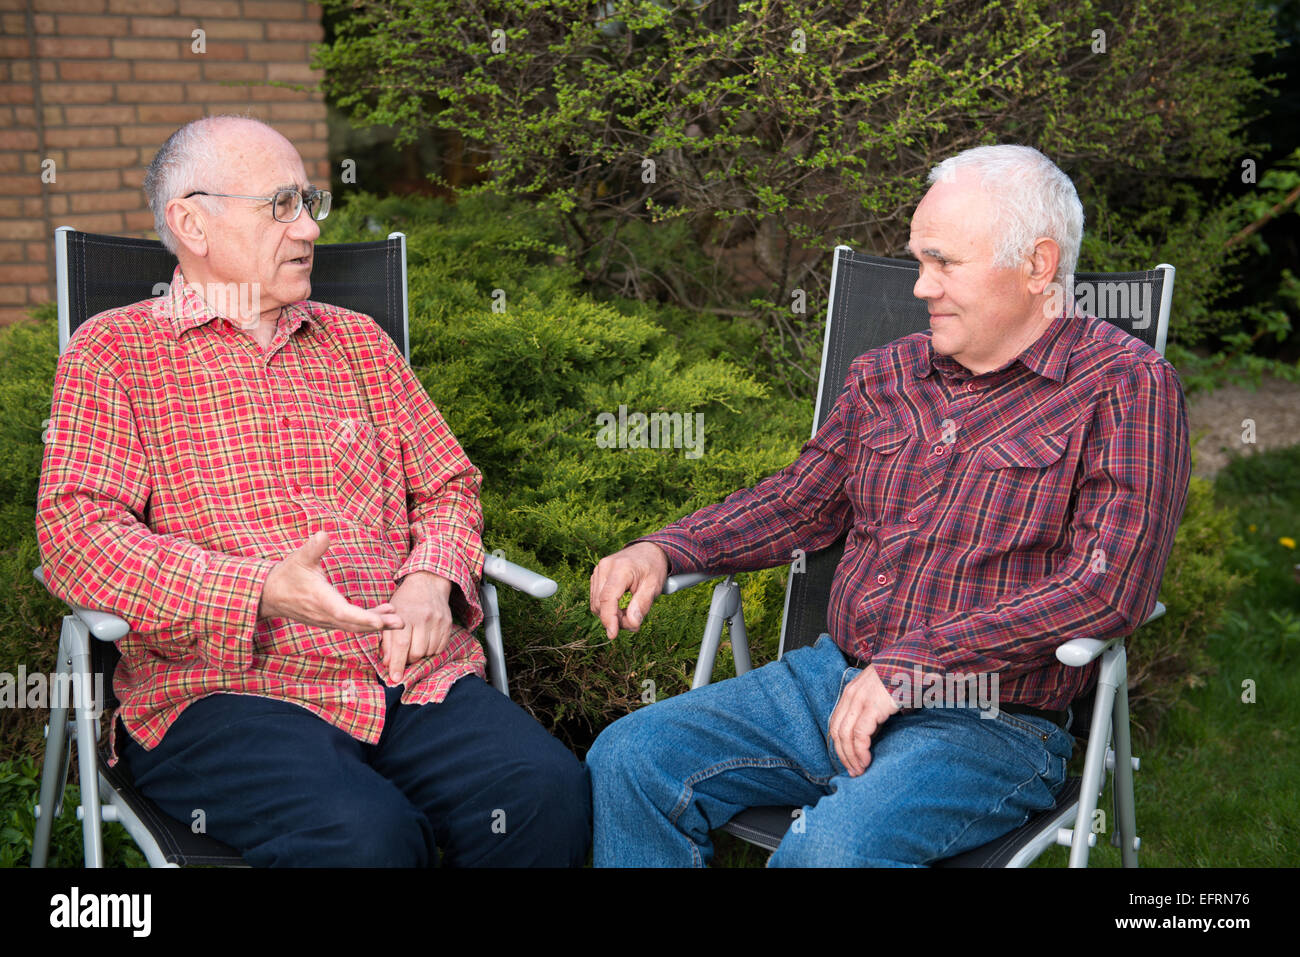 two senior men sitting in garden and chatting Stock Photo